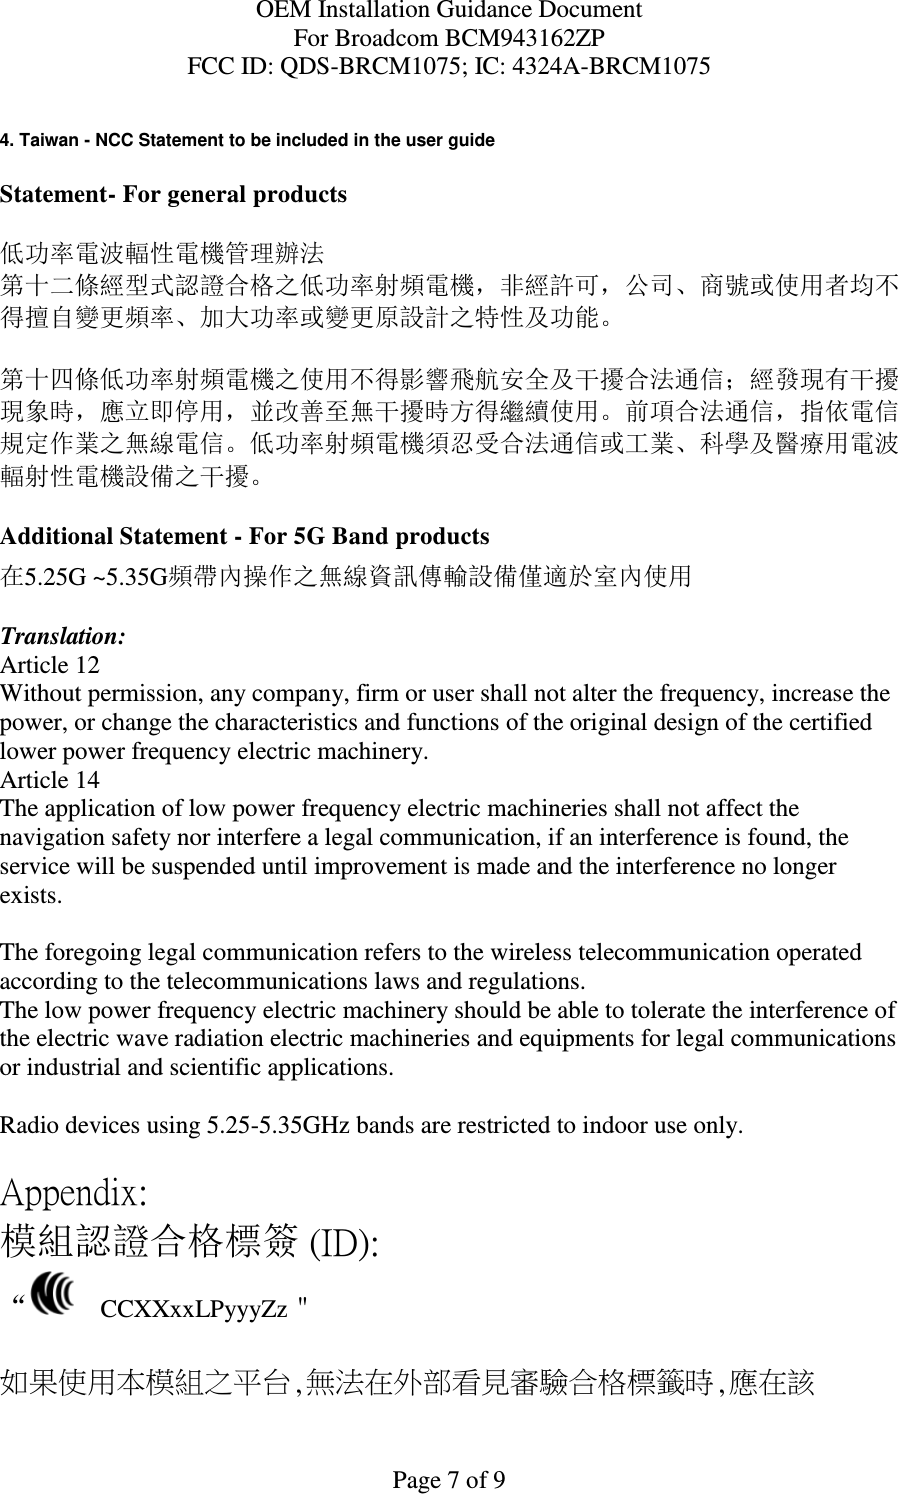 OEM Installation Guidance Document For Broadcom BCM943162ZP FCC ID: QDS-BRCM1075; IC: 4324A-BRCM1075  Page 7 of 9  4. Taiwan - NCC Statement to be included in the user guide  Statement- For general products  低功率電波輻性電機管理辦法 第十二條經型式認證合格之低功率射頻電機，非經許可，公司、商號或使用者均不得擅自變更頻率、加大功率或變更原設計之特性及功能。  第十四條低功率射頻電機之使用不得影響飛航安全及干擾合法通信；經發現有干擾現象時，應立即停用，並改善至無干擾時方得繼續使用。前項合法通信，指依電信規定作業之無線電信。低功率射頻電機須忍受合法通信或工業、科學及醫療用電波輻射性電機設備之干擾。  Additional Statement - For 5G Band products 在5.25G ~5.35G頻帶內操作之無線資訊傳輸設備僅適於室內使用  Translation: Article 12 Without permission, any company, firm or user shall not alter the frequency, increase the power, or change the characteristics and functions of the original design of the certified lower power frequency electric machinery. Article 14 The application of low power frequency electric machineries shall not affect the navigation safety nor interfere a legal communication, if an interference is found, the service will be suspended until improvement is made and the interference no longer exists.  The foregoing legal communication refers to the wireless telecommunication operated according to the telecommunications laws and regulations. The low power frequency electric machinery should be able to tolerate the interference of the electric wave radiation electric machineries and equipments for legal communications or industrial and scientific applications.  Radio devices using 5.25-5.35GHz bands are restricted to indoor use only.  Appendix: 模組認證合格標簽 (ID): “   CCXXxxLPyyyZz＂  如果使用本模組之平台,無法在外部看見審驗合格標籤時,應在該 